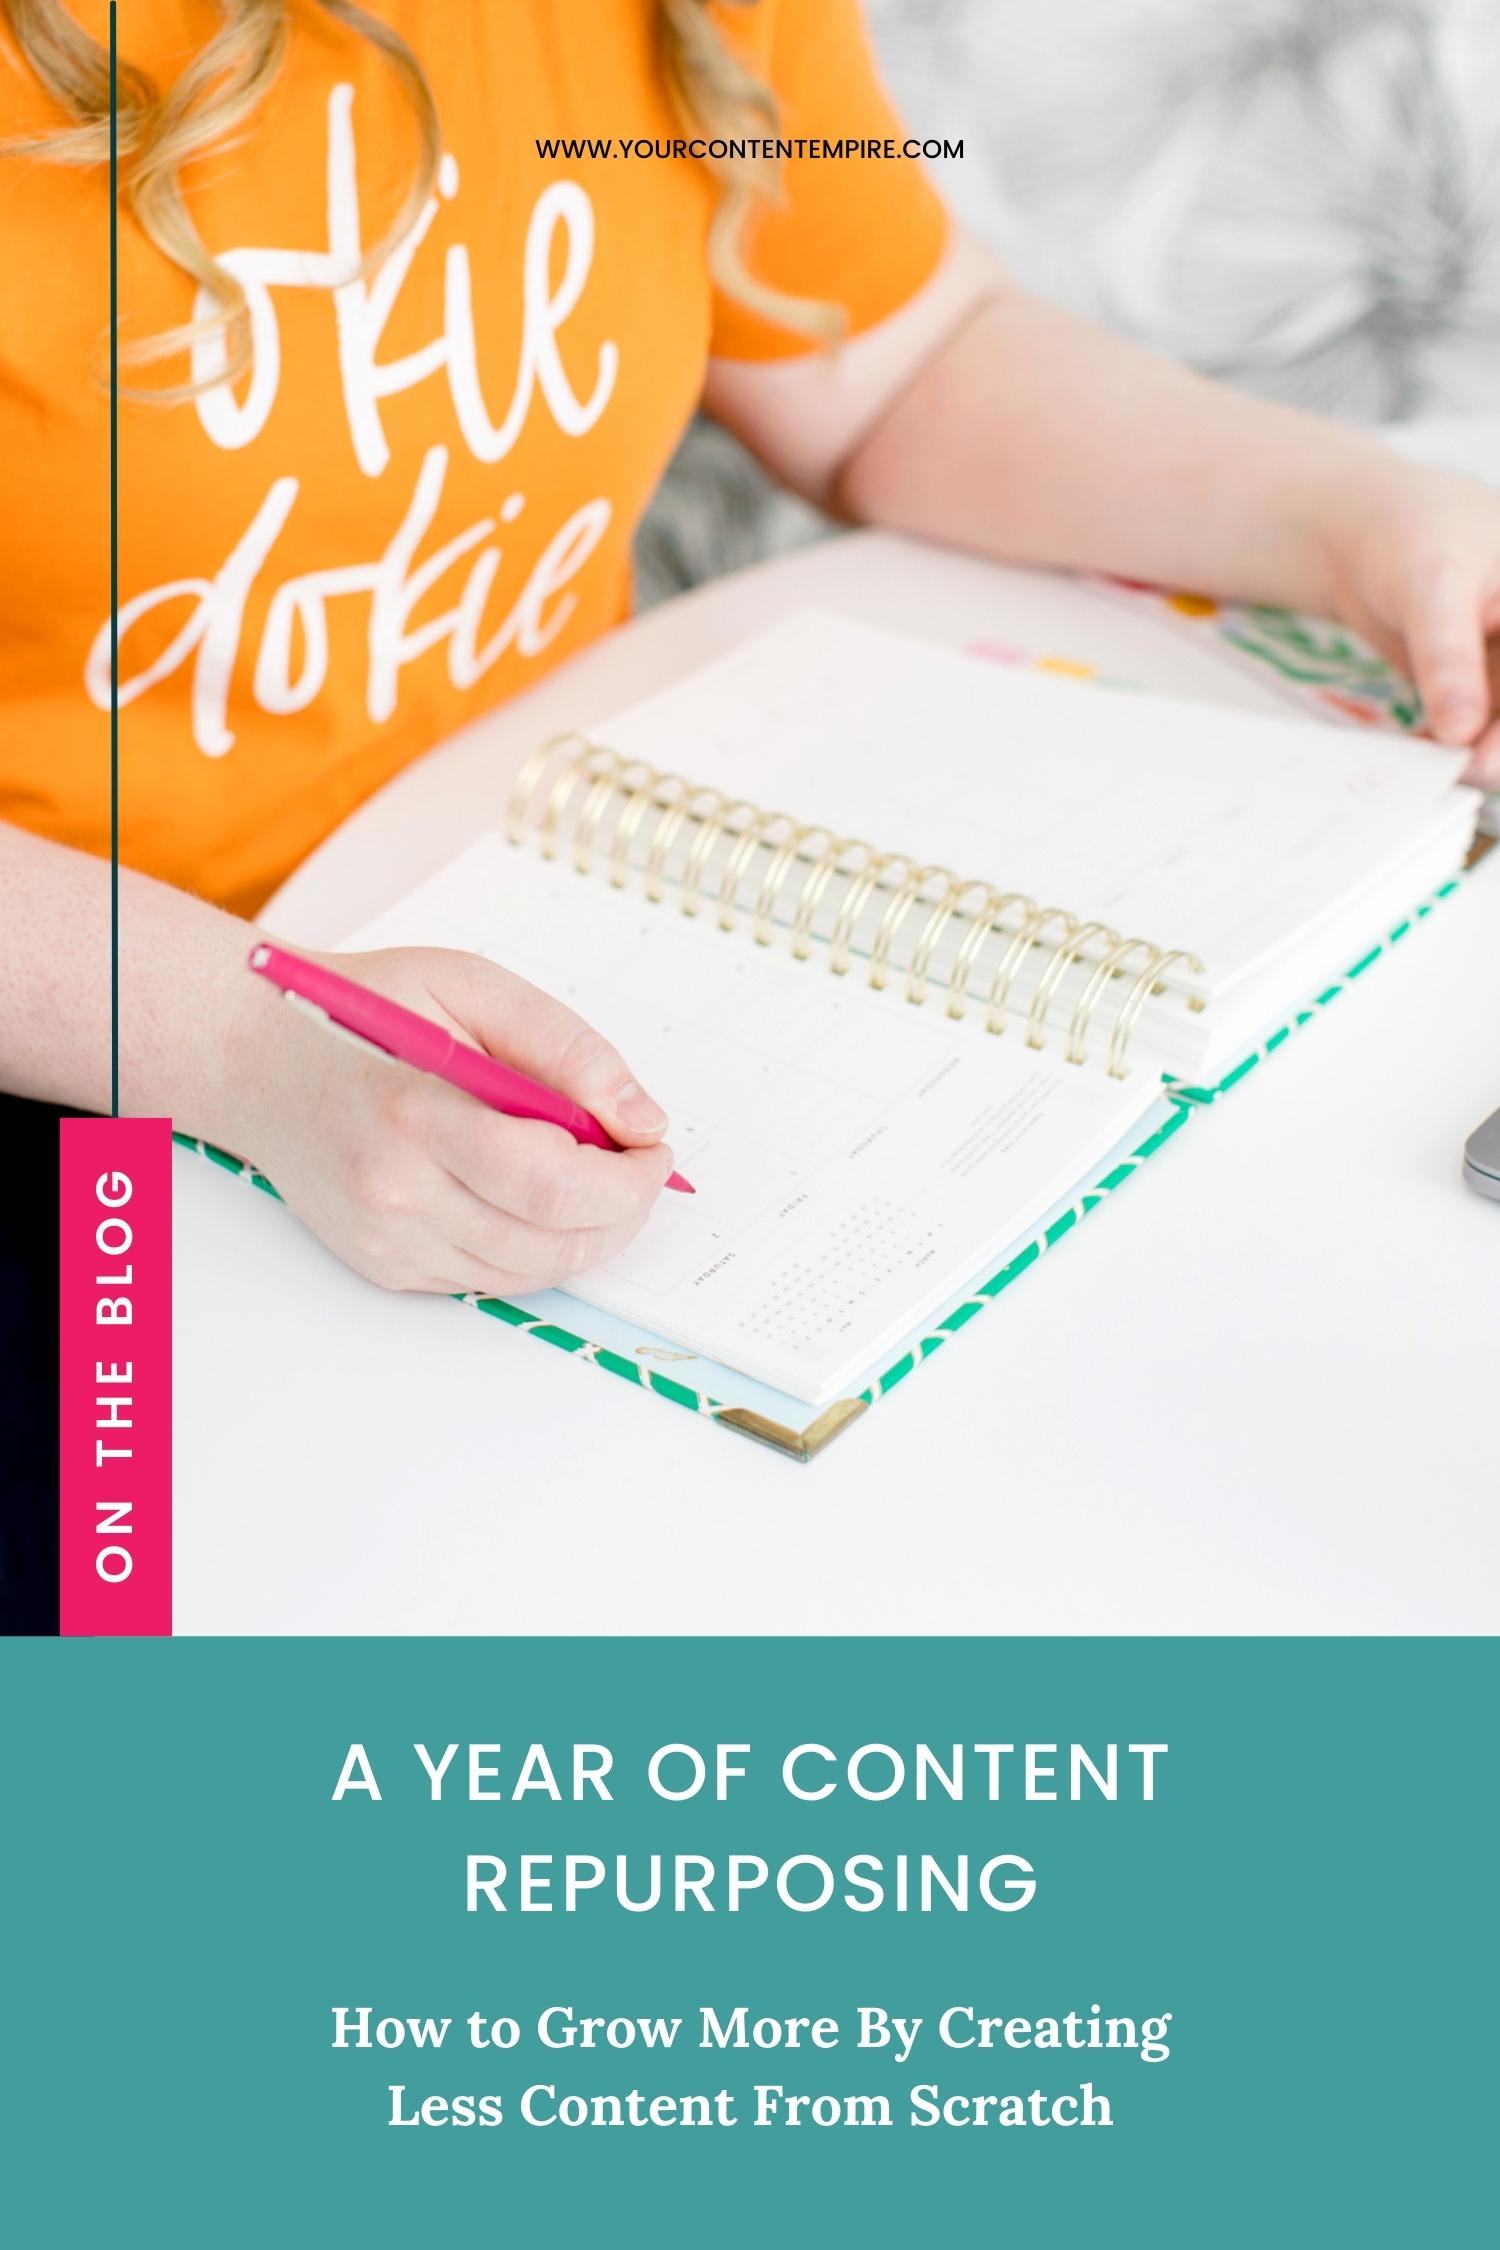 A Year of Content Repurposing by Your Content Empire